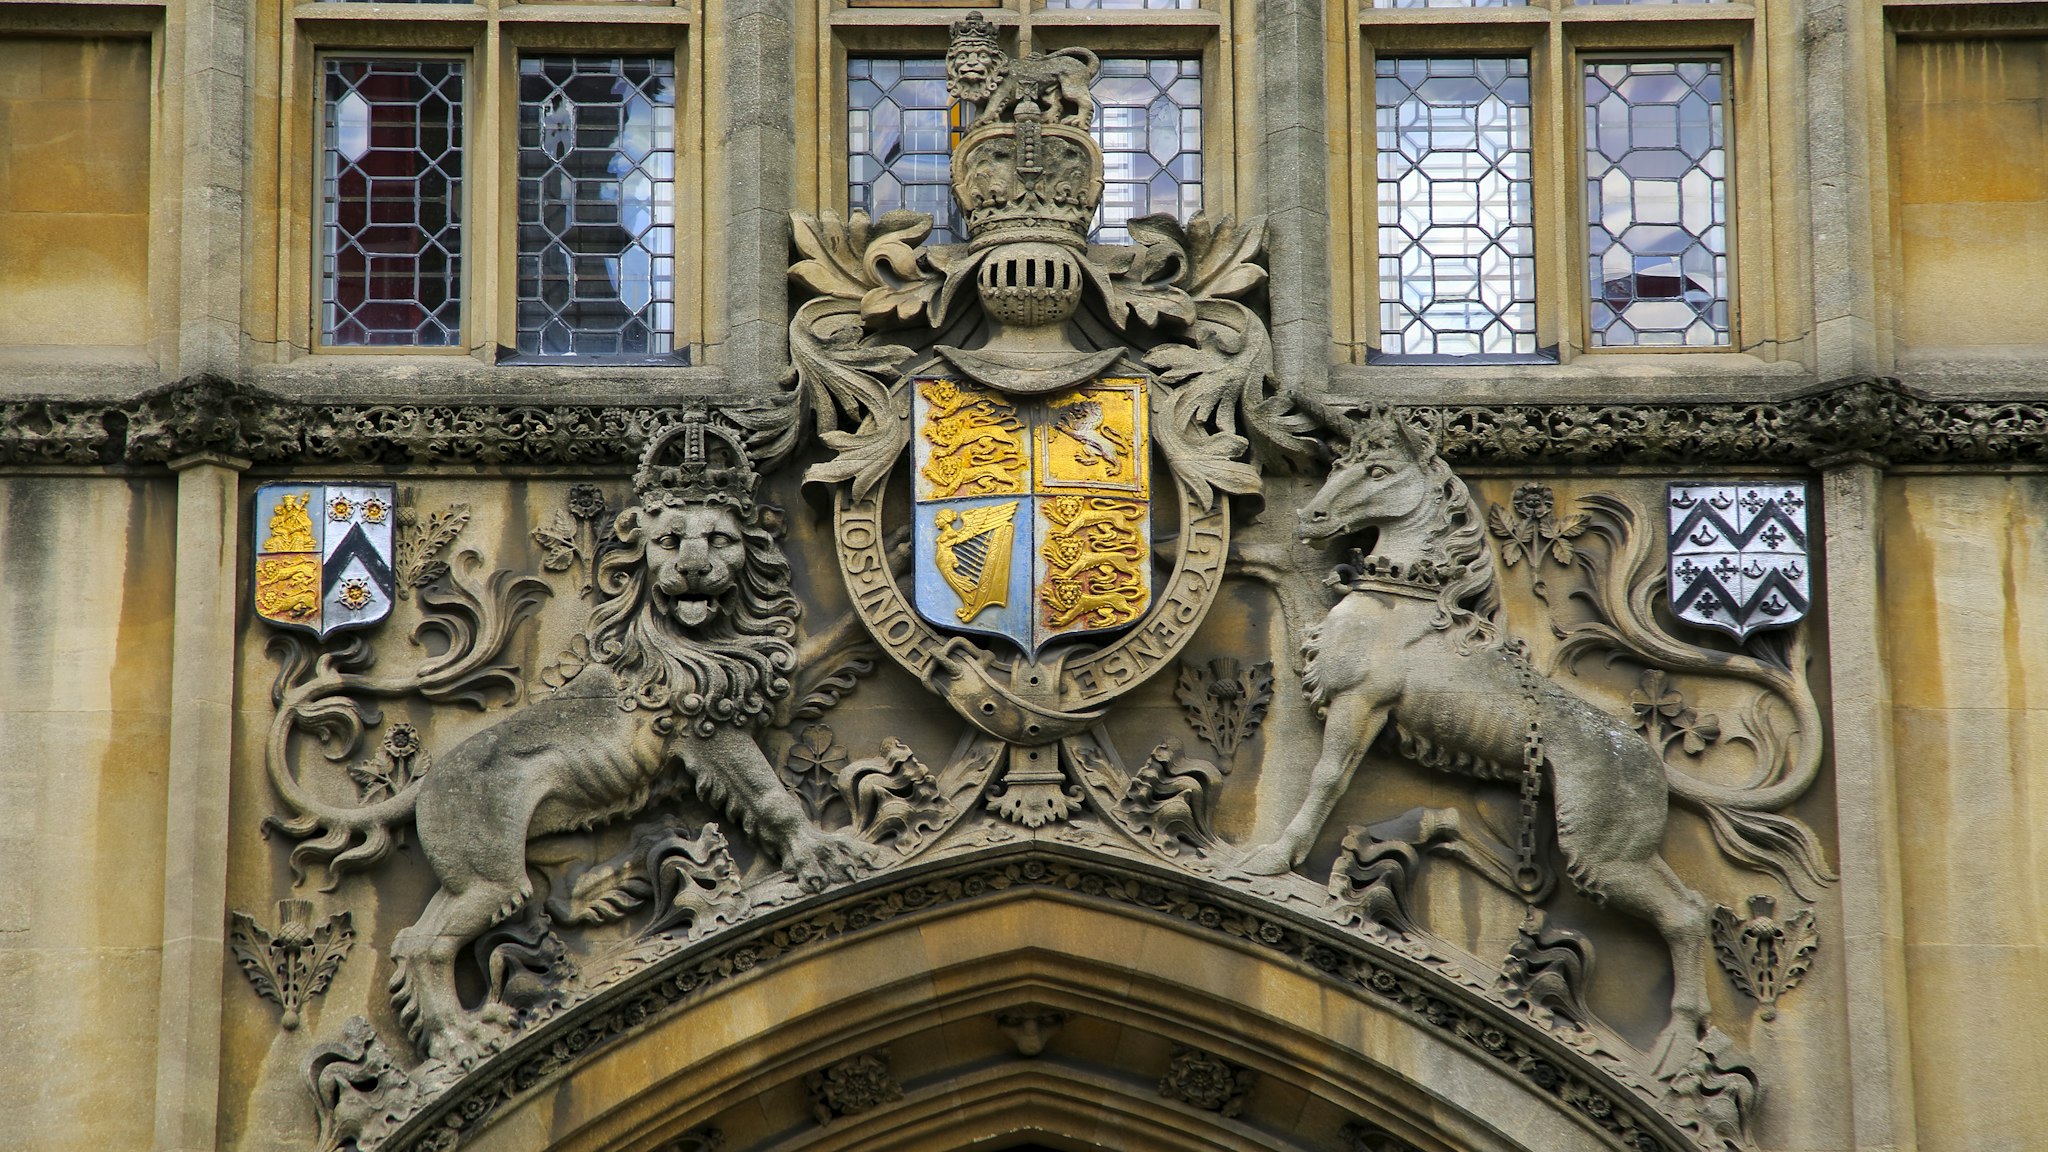 Heraldic emblems over entrance to Brasenose College building frontage University of Oxford, England, UK. (Photo by: Geography Photos/Universal Images Group via Getty Images)